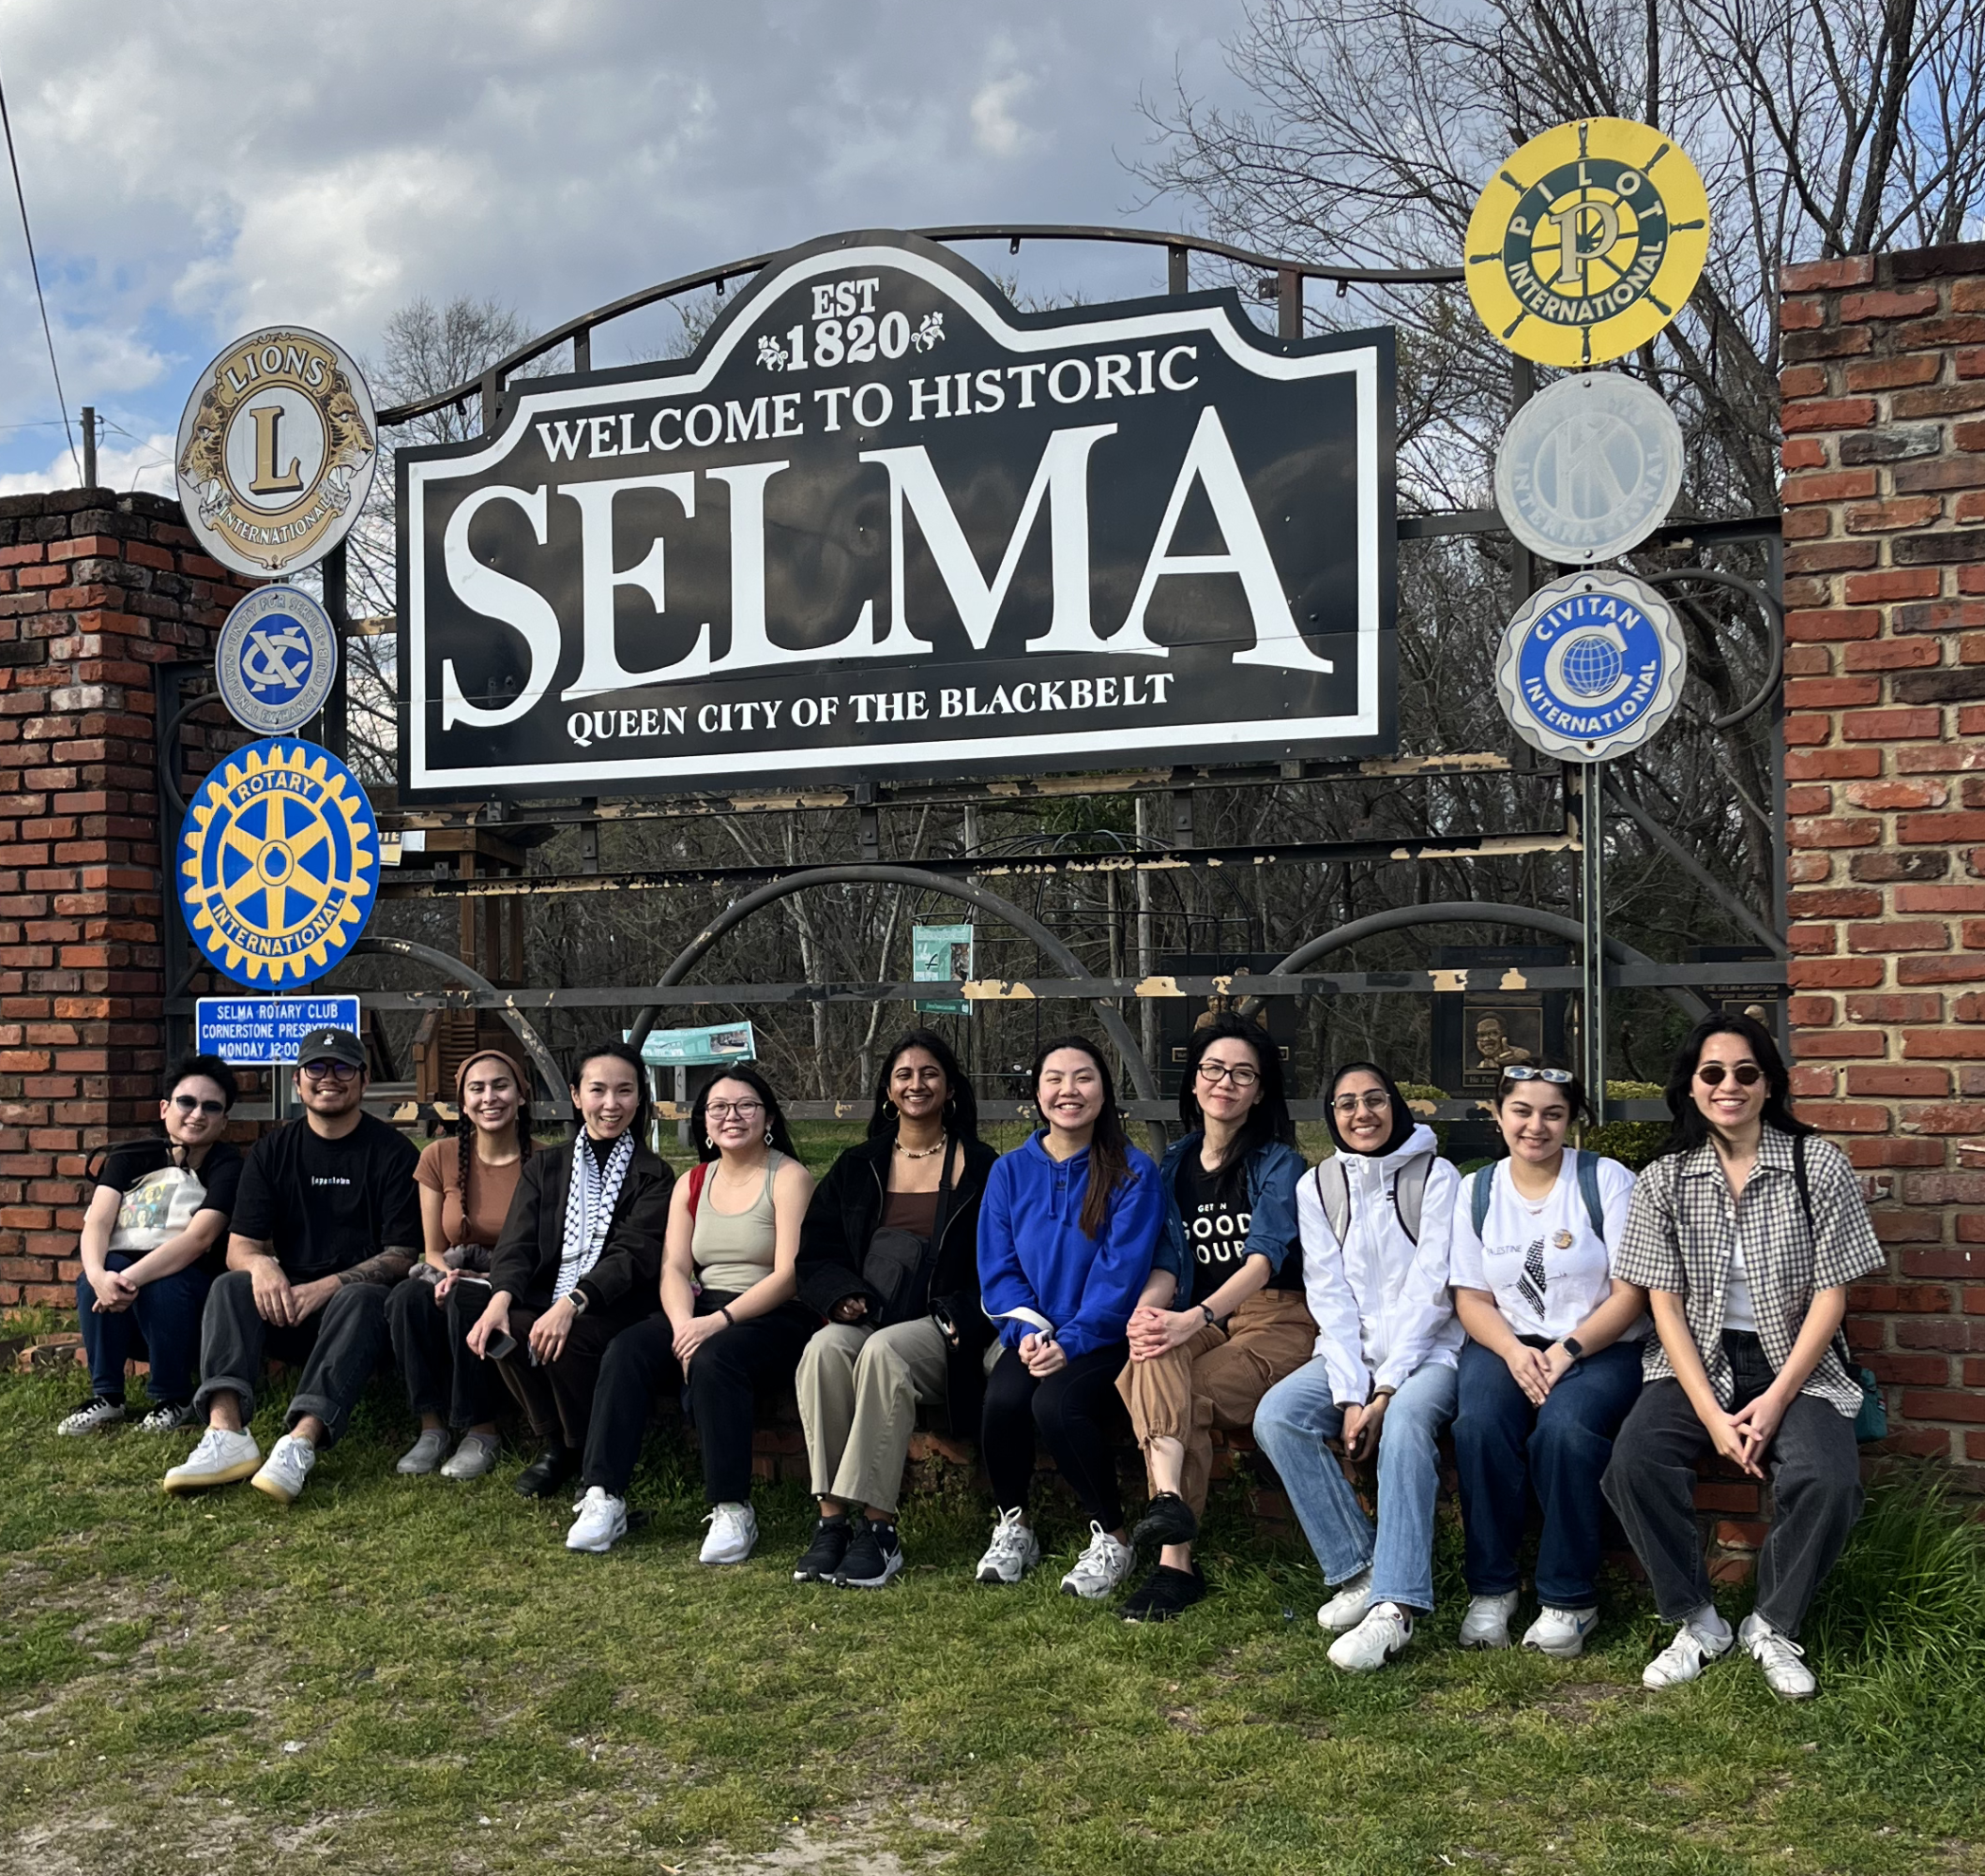 11 staff members pose seated under a sign that reads "Est 1920 Welcome to Historic Selma, Queen City of the Blackbelt"